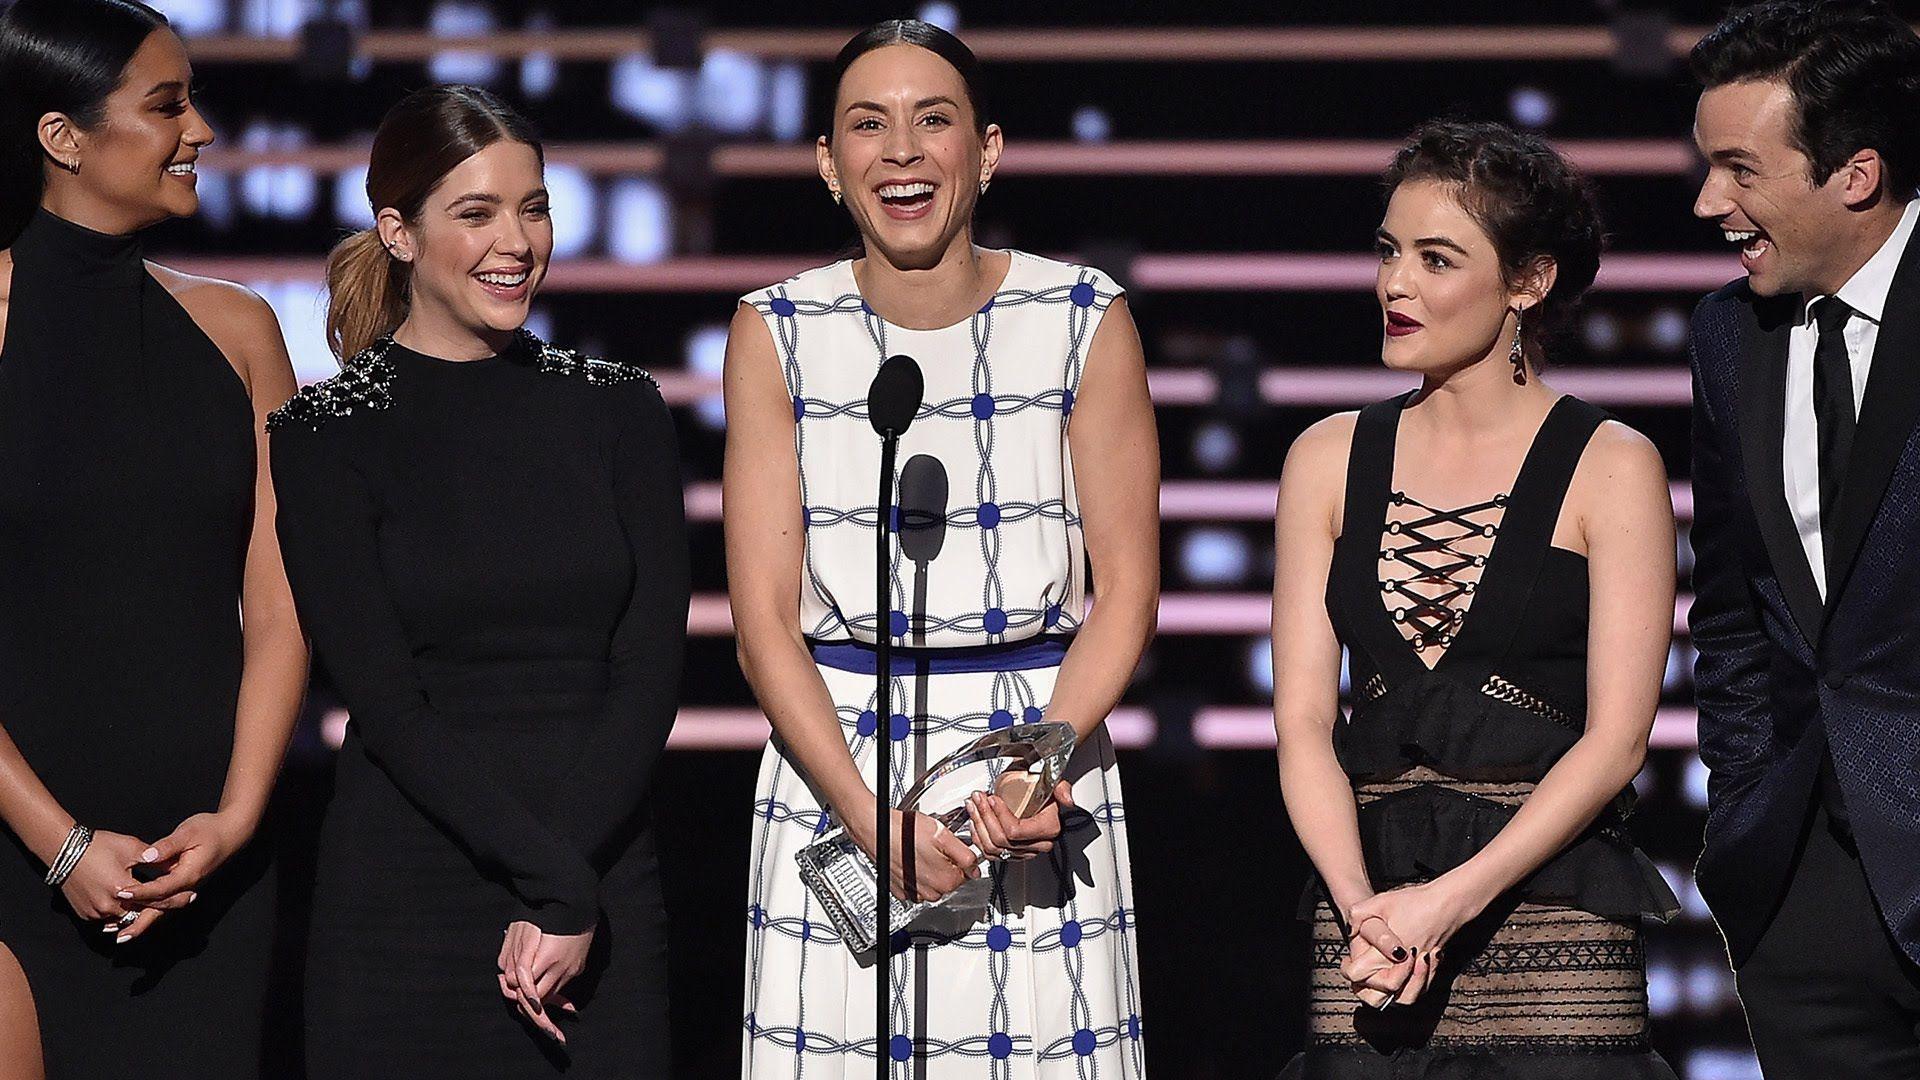 Pretty Little Liars Cast Accepts Award For Best Cable TV Drama At